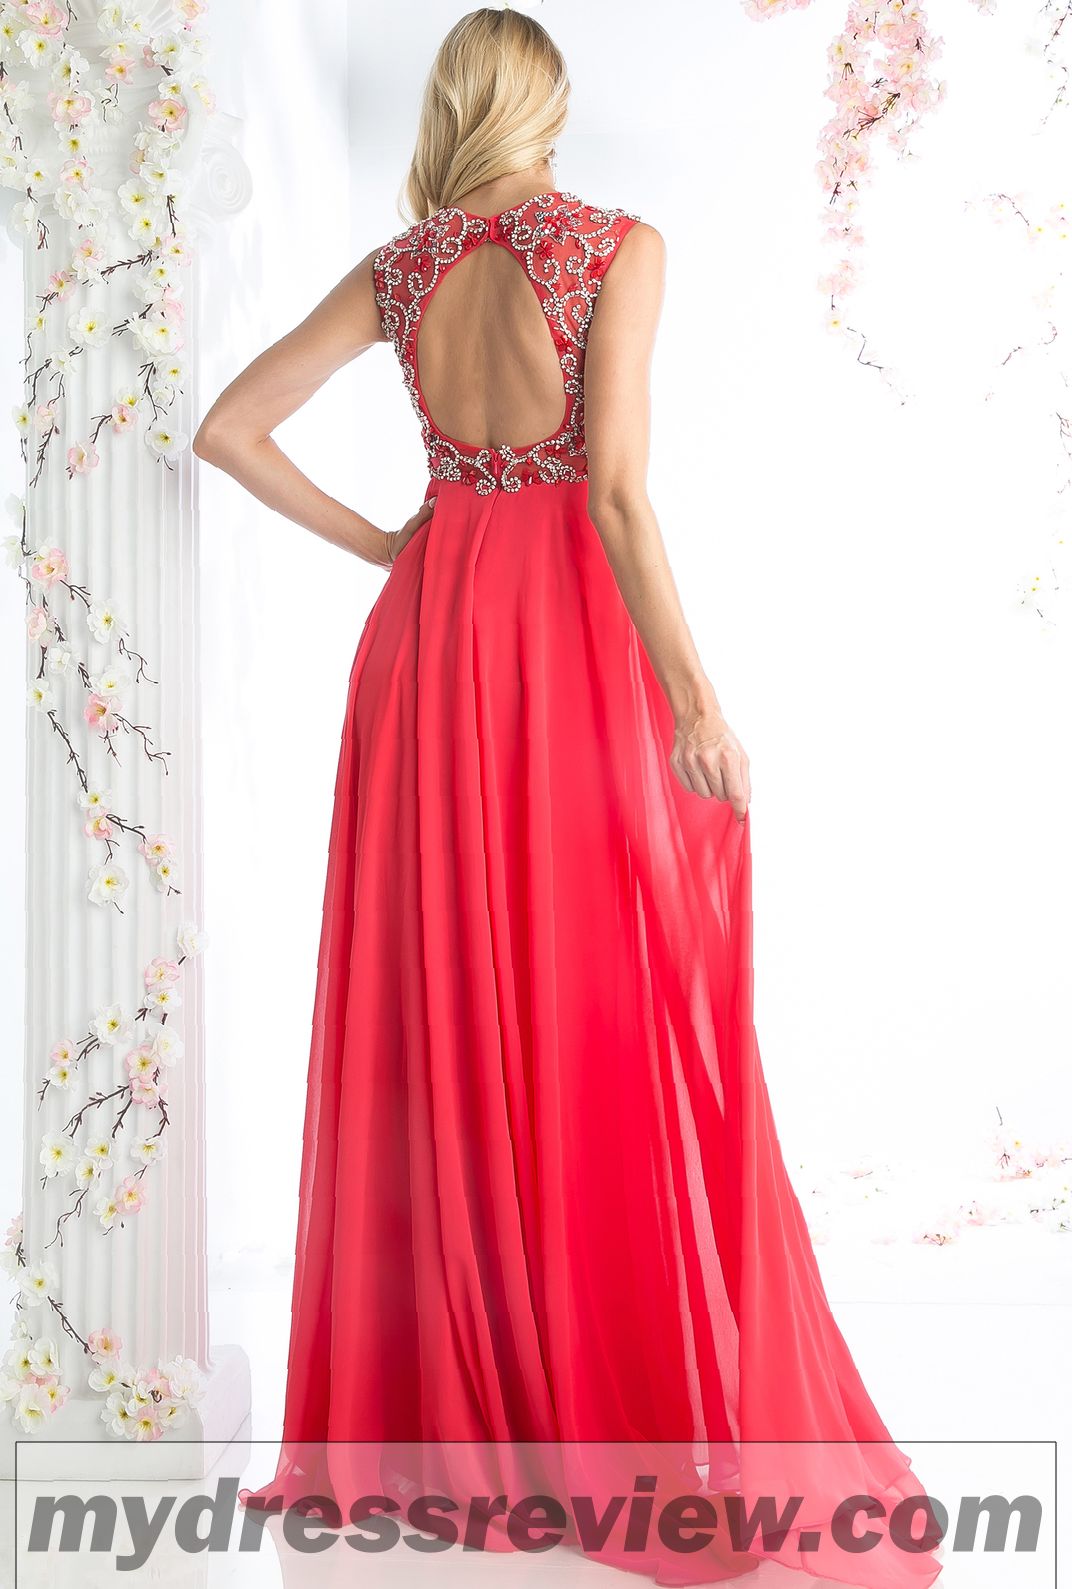 Sleeveless Floor Length Dress With Sequin Embellished Bodice - Review Clothing Brand